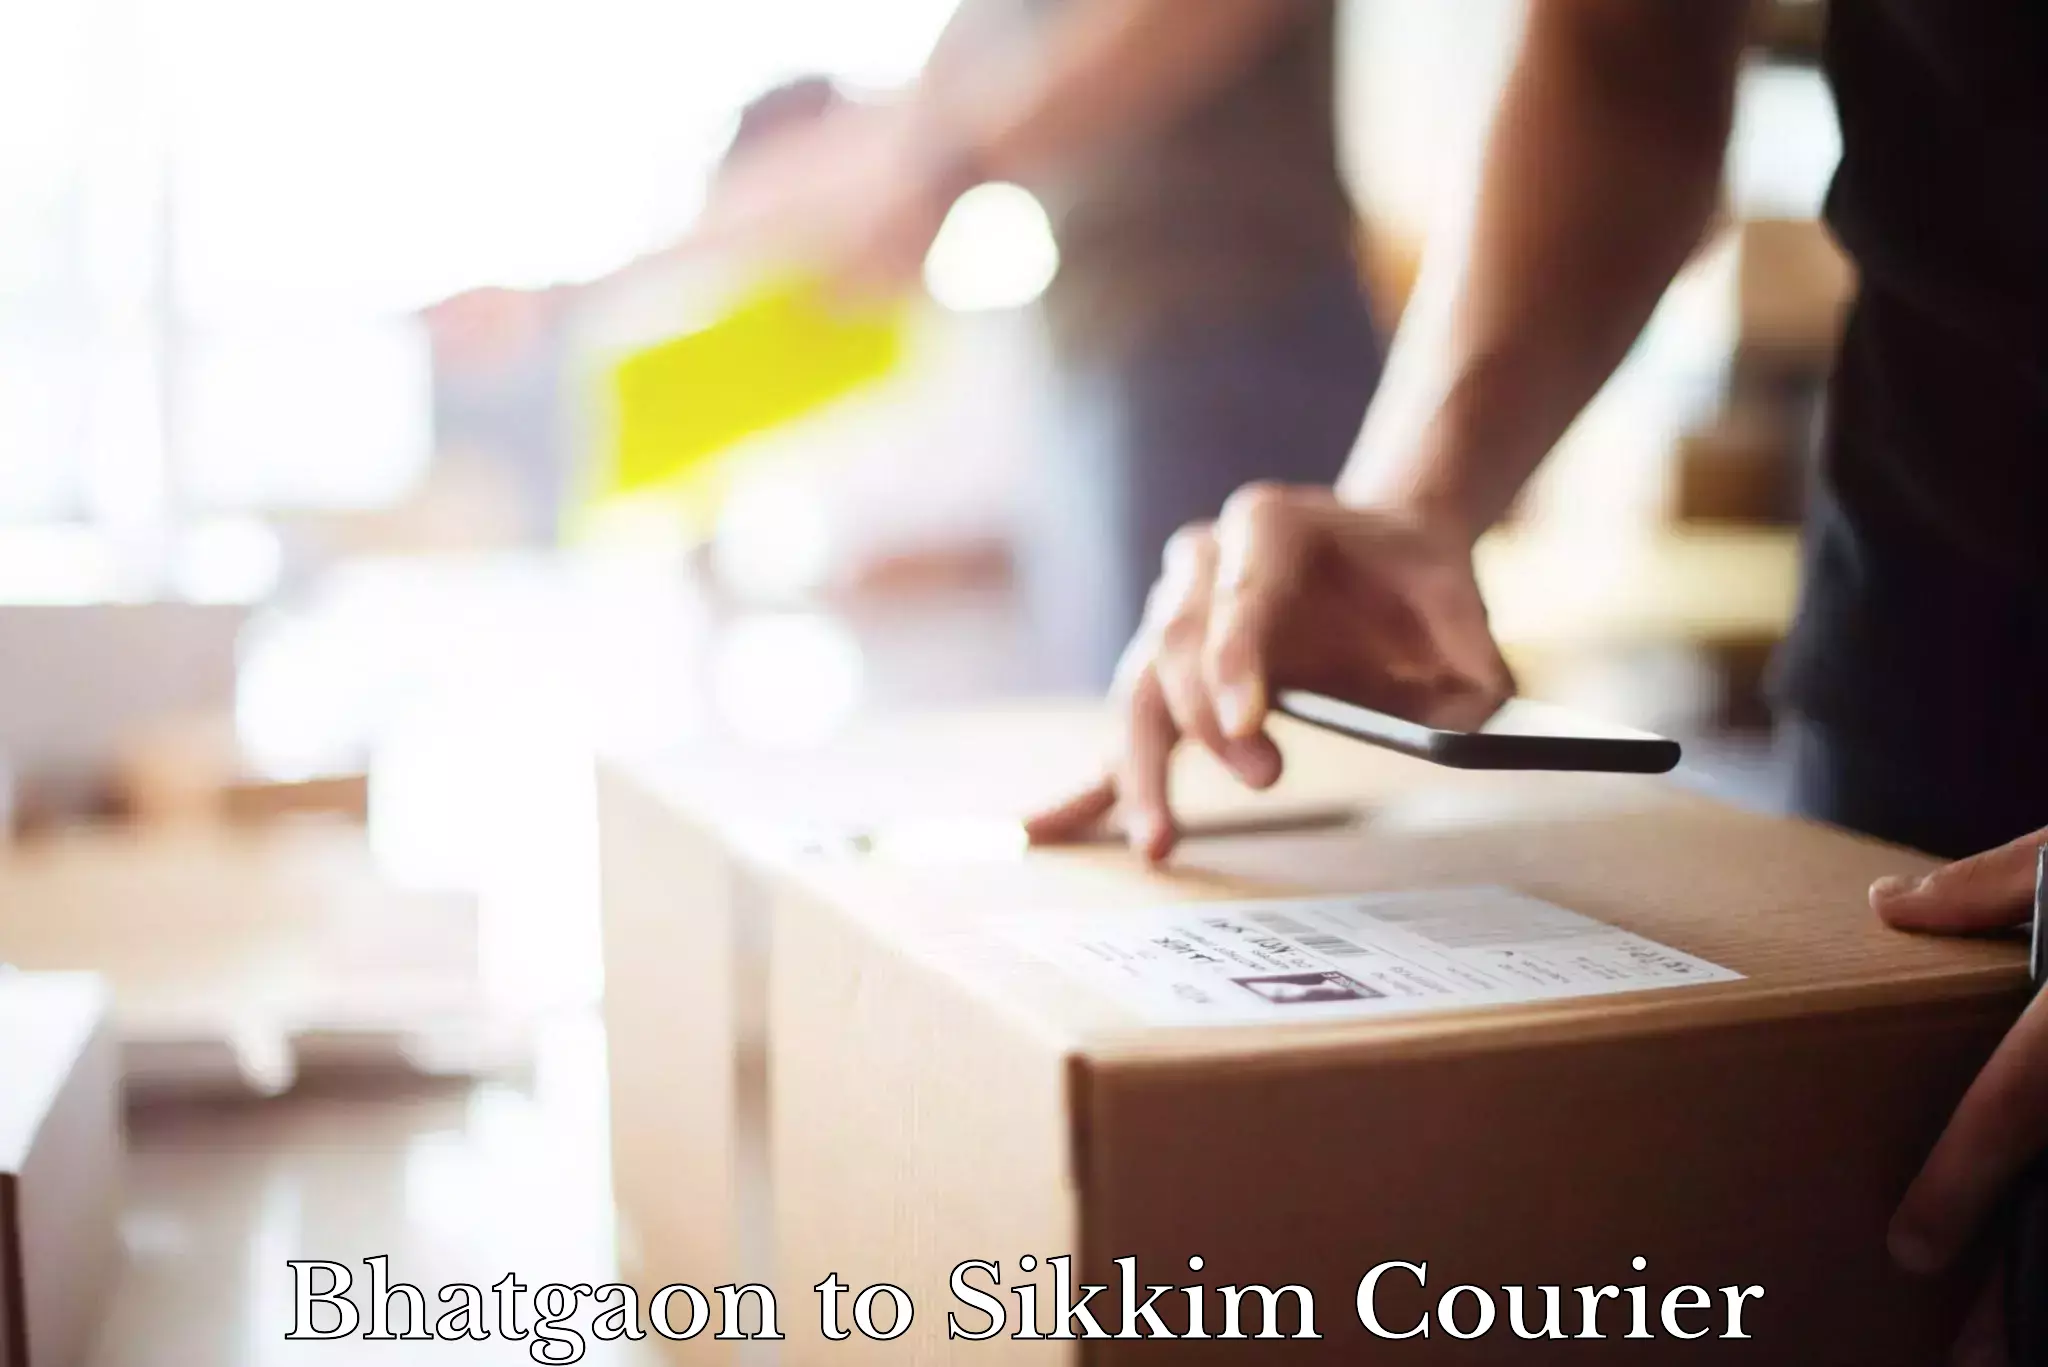 Courier service booking Bhatgaon to Sikkim